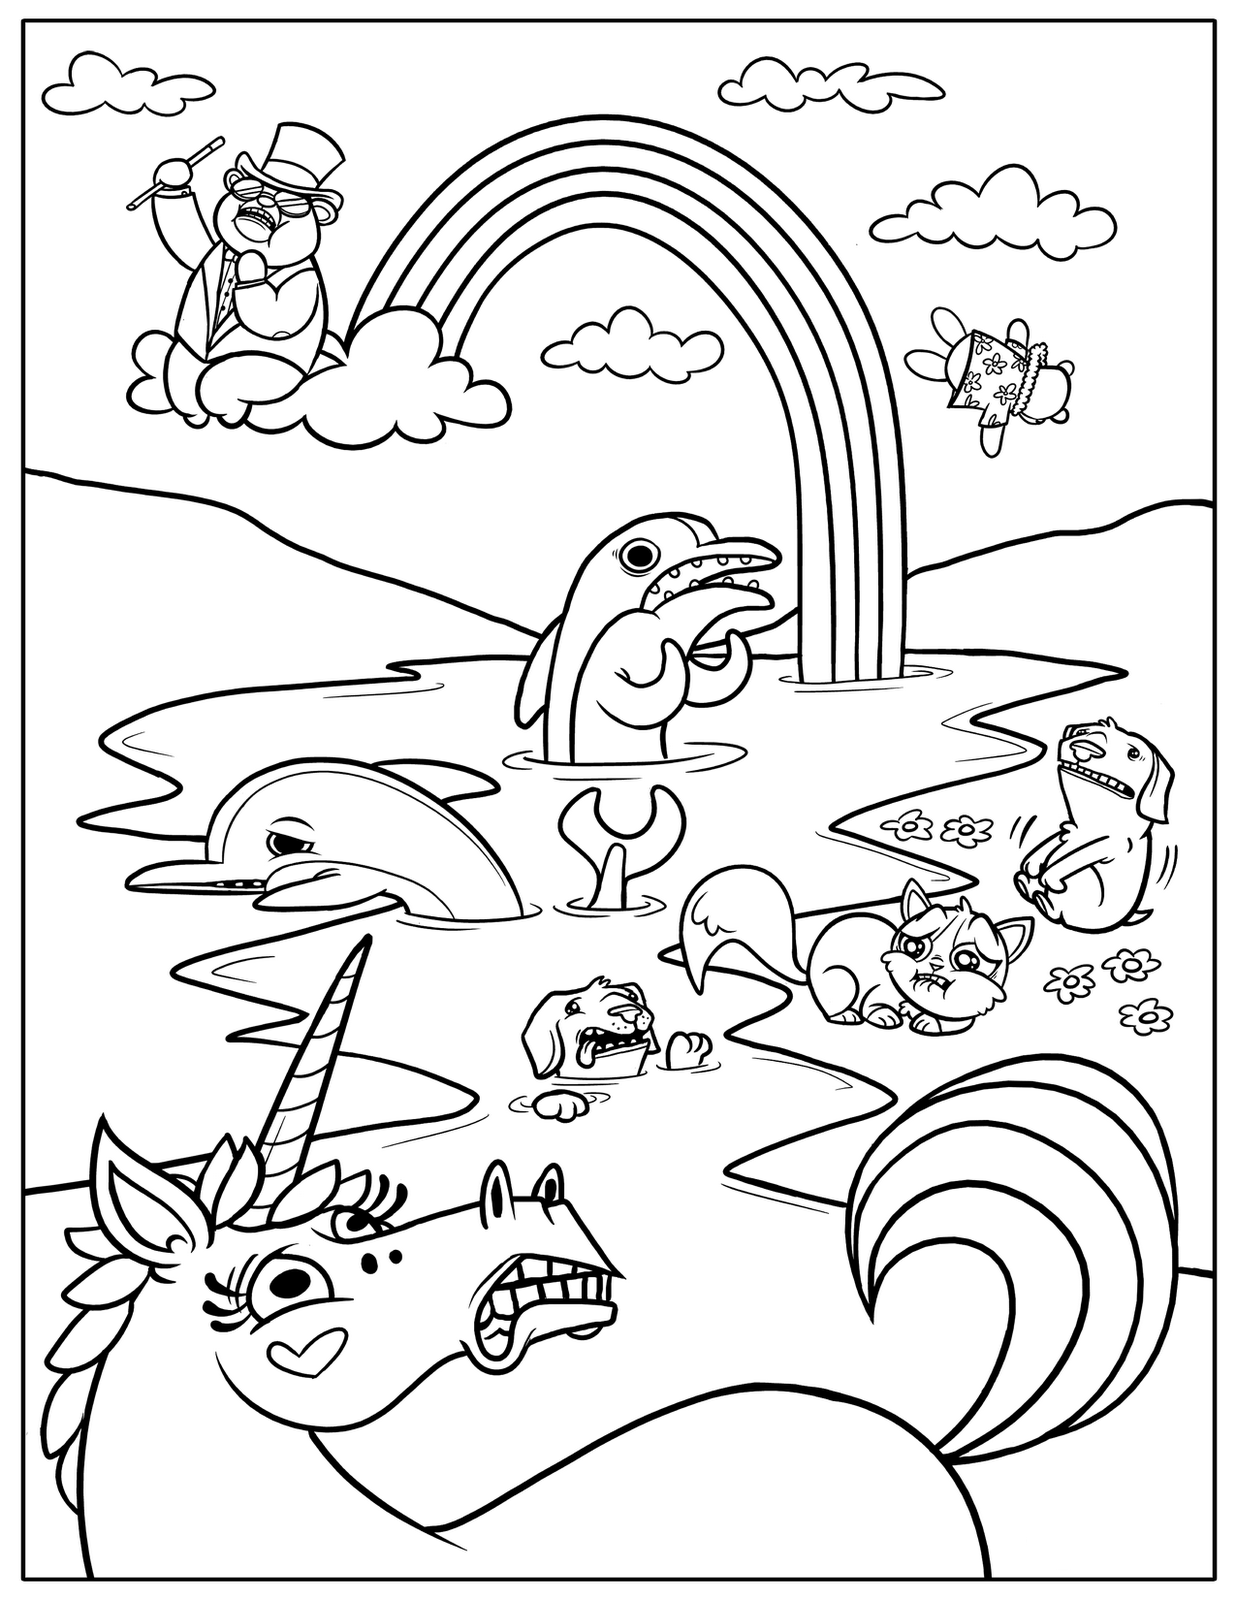 Download Rainbow Coloring Page | Ally's Party